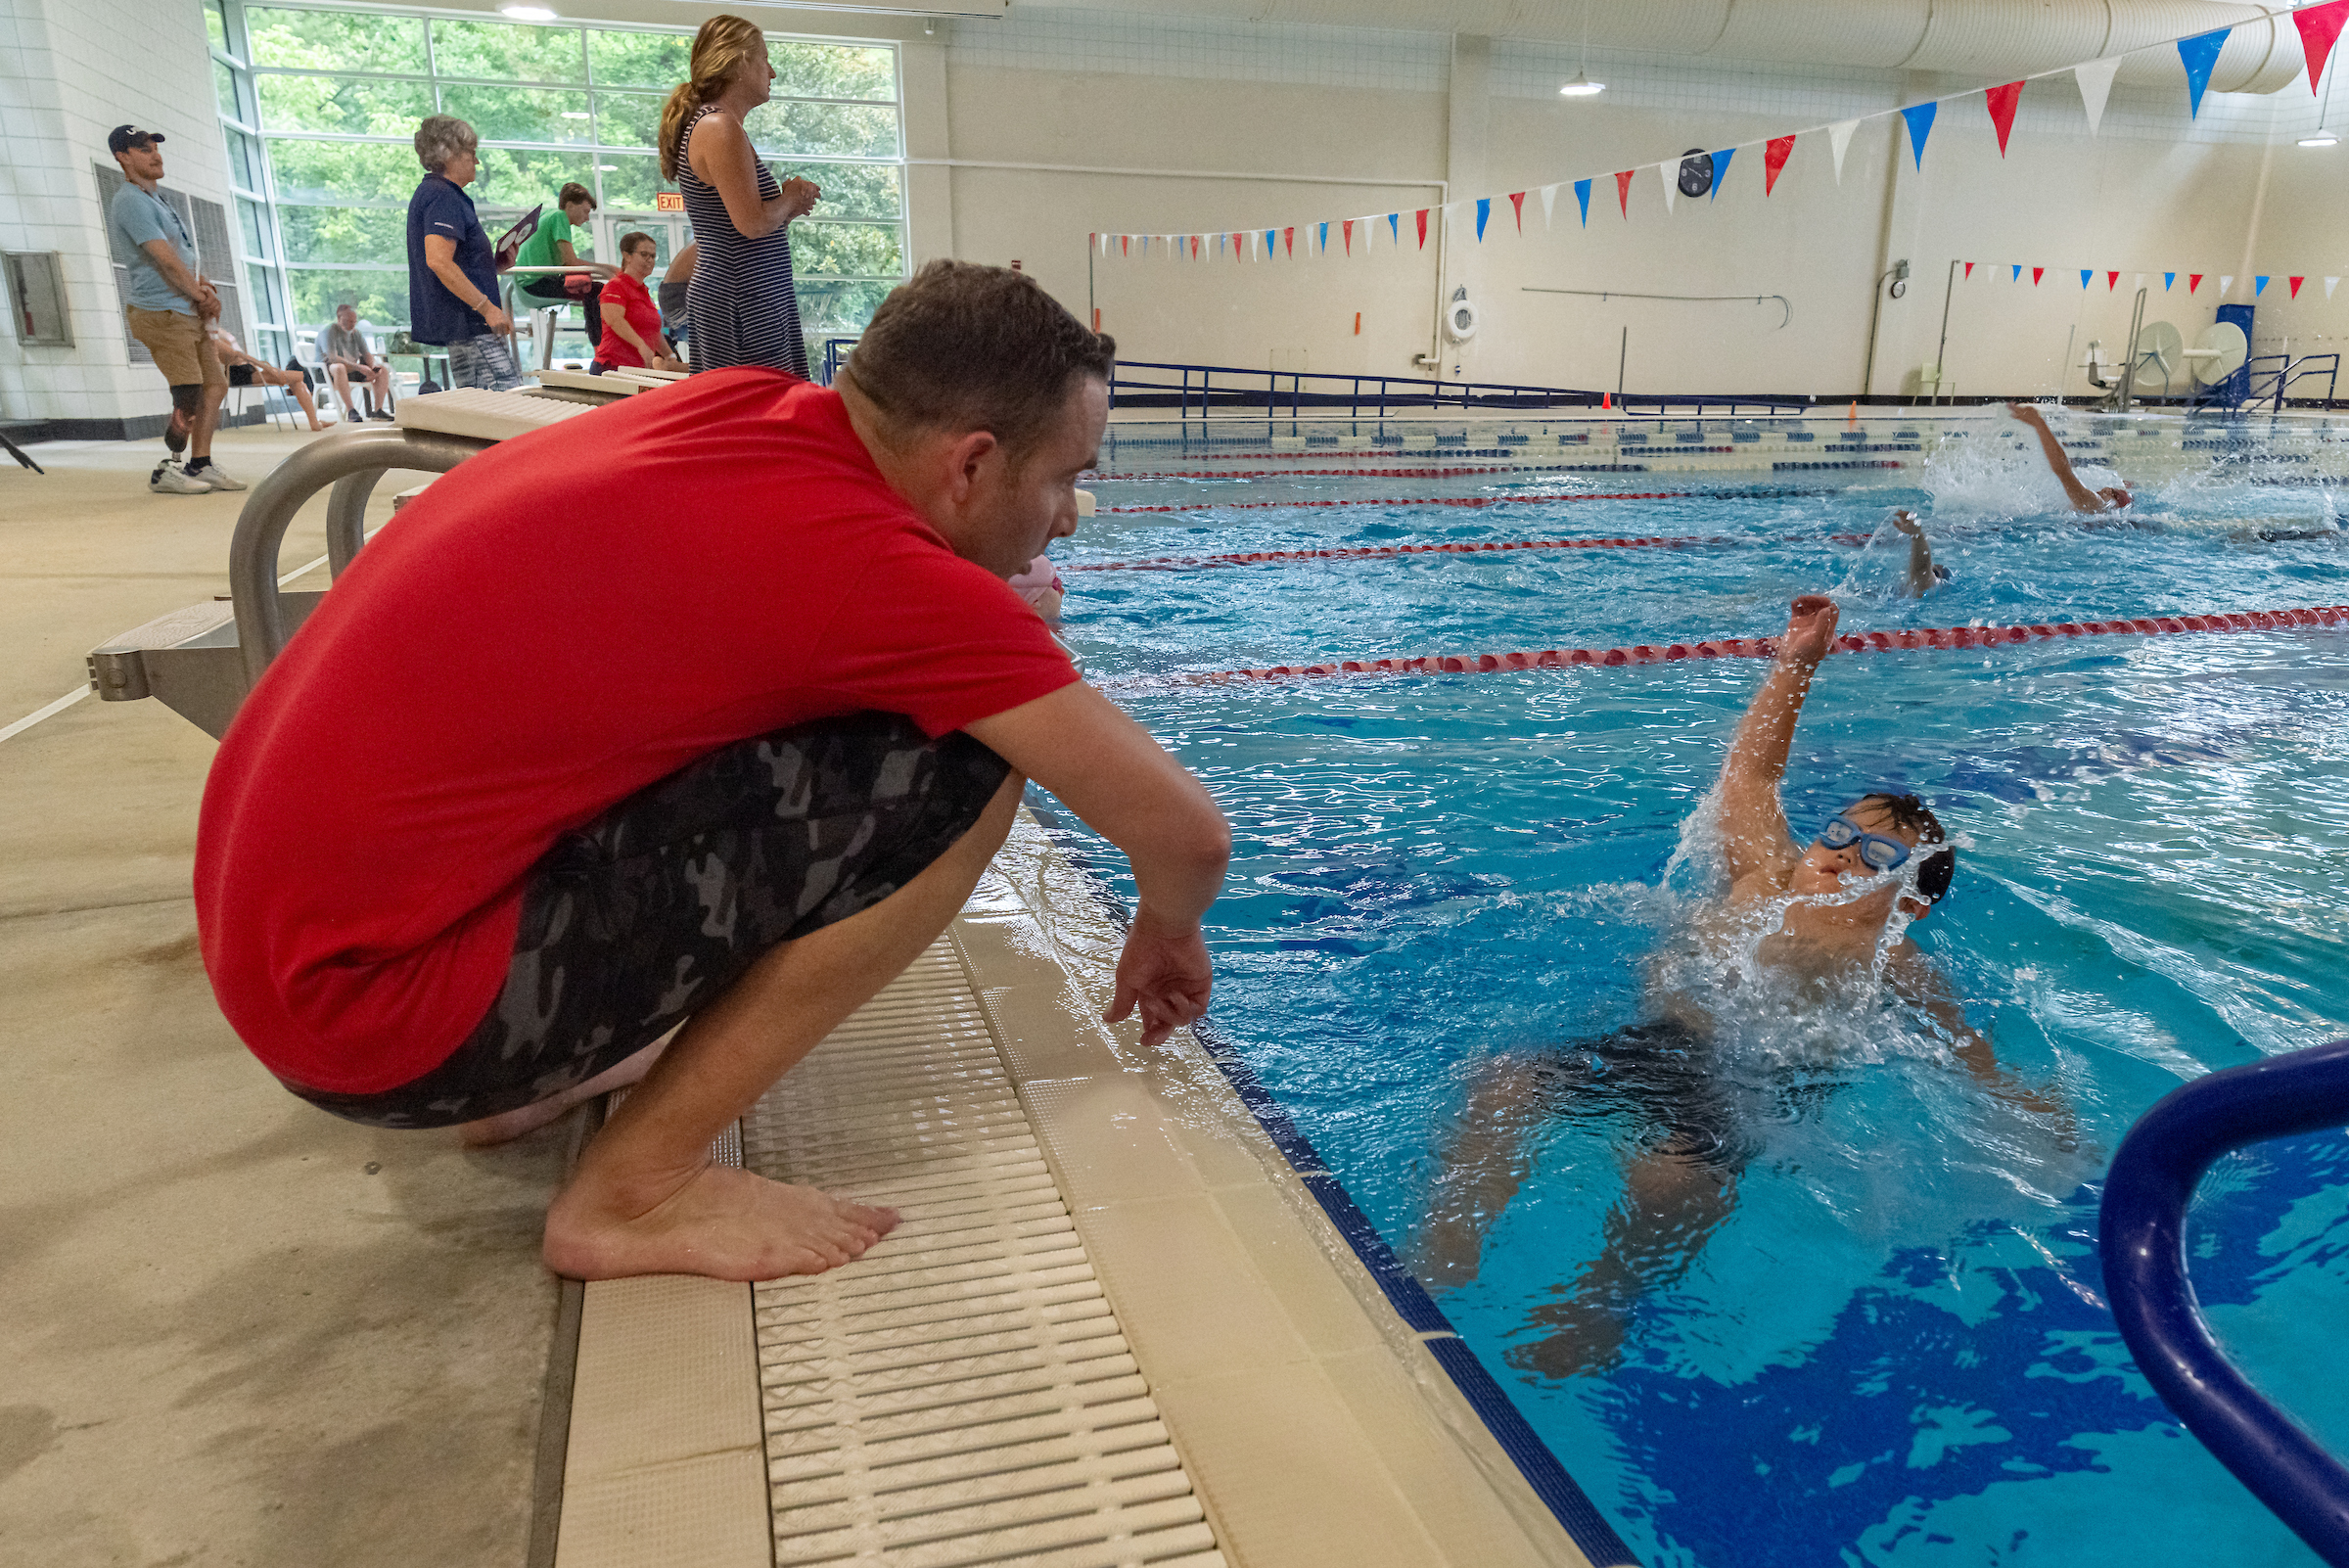 Young boy doing the backstroke while being coached by a man poolside wearing a red shirt.